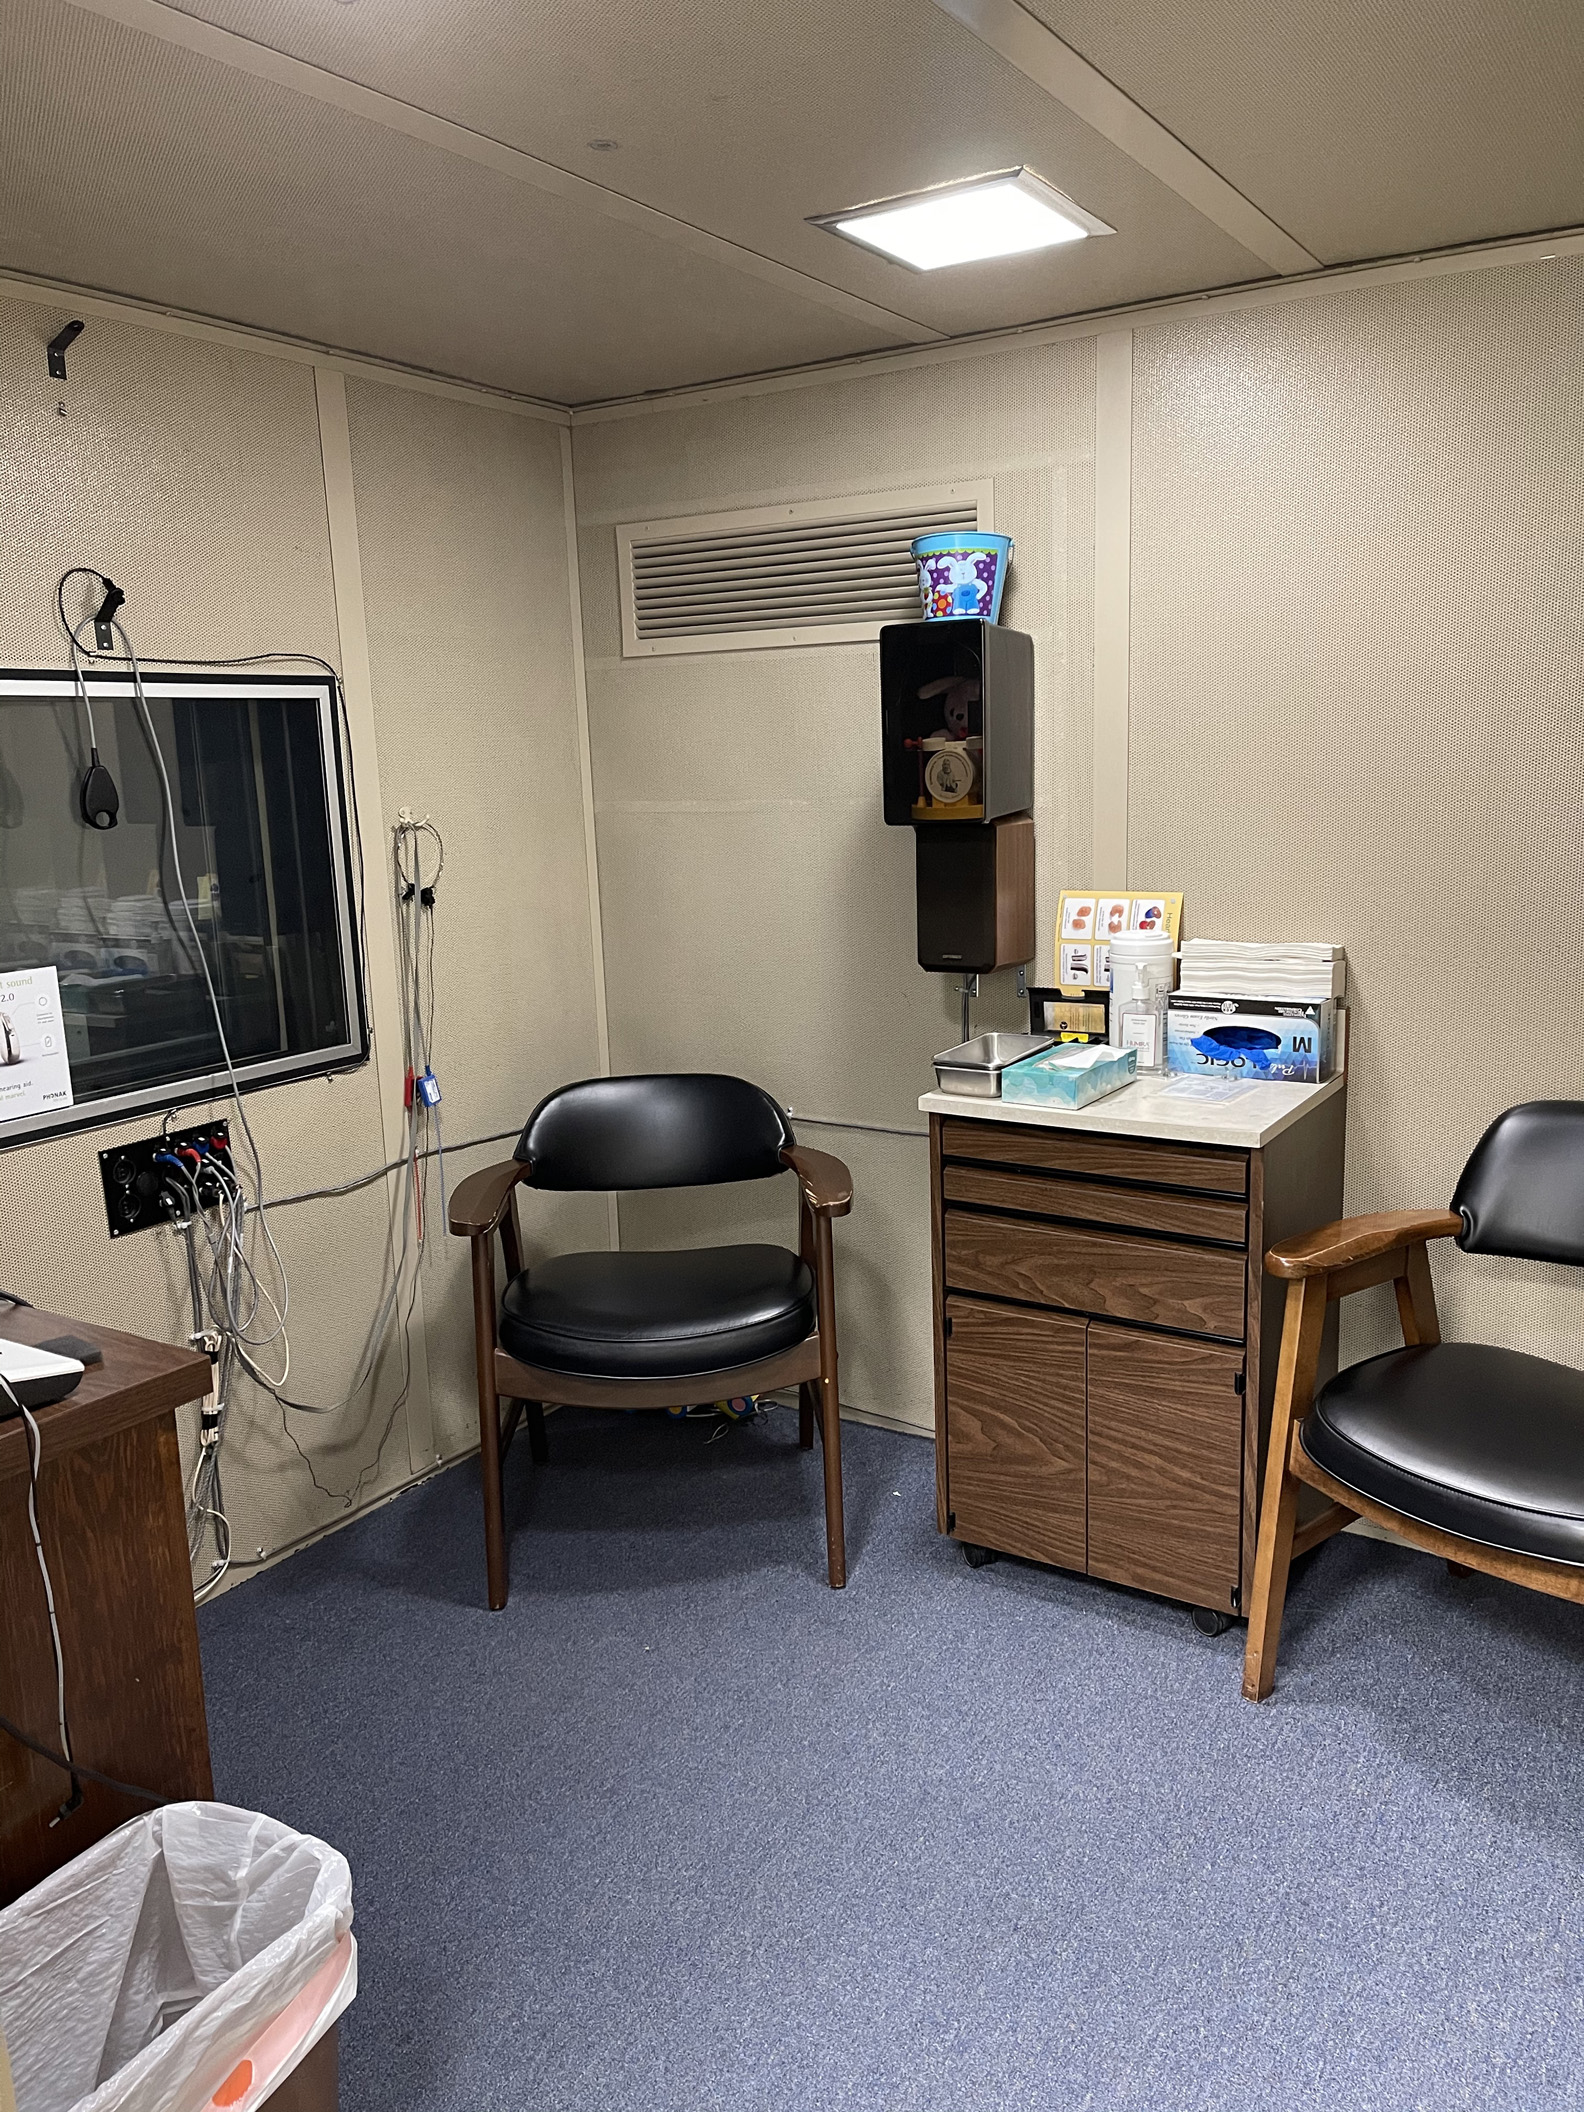 Inside our spacious handicap accessible soundbooth.